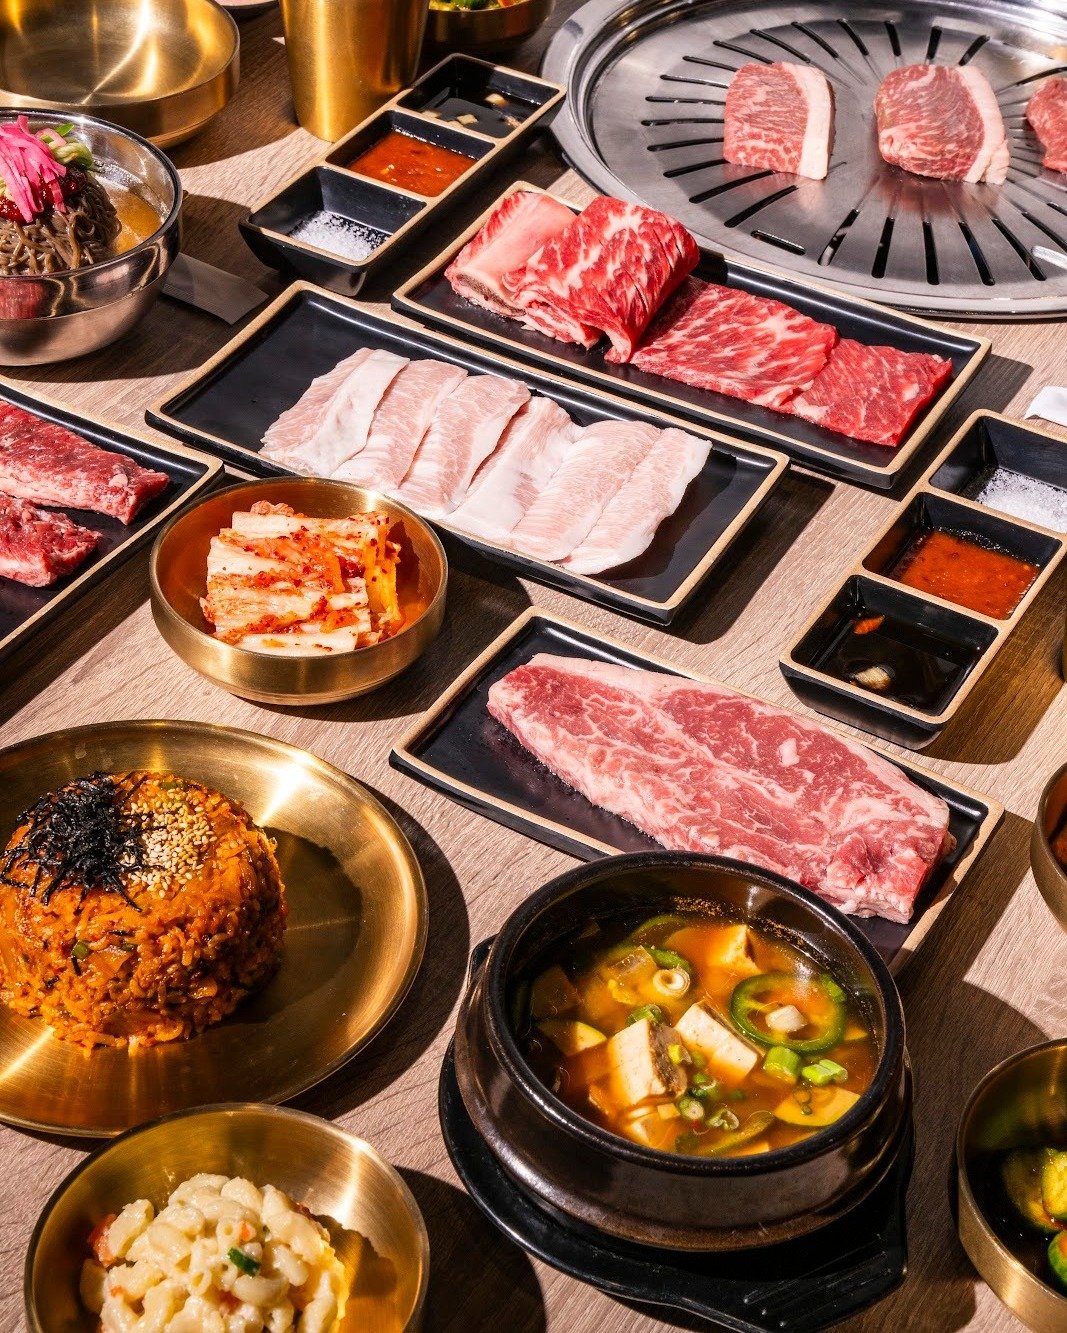 Grill vibes on point. ♨️ Tag your squad and come through for an AYCE feast at our place! 

#88qkbbq #koreanbbq #kbbqnight #datenight #koreanfood #grilllovers #meatlover #banchan #rowland